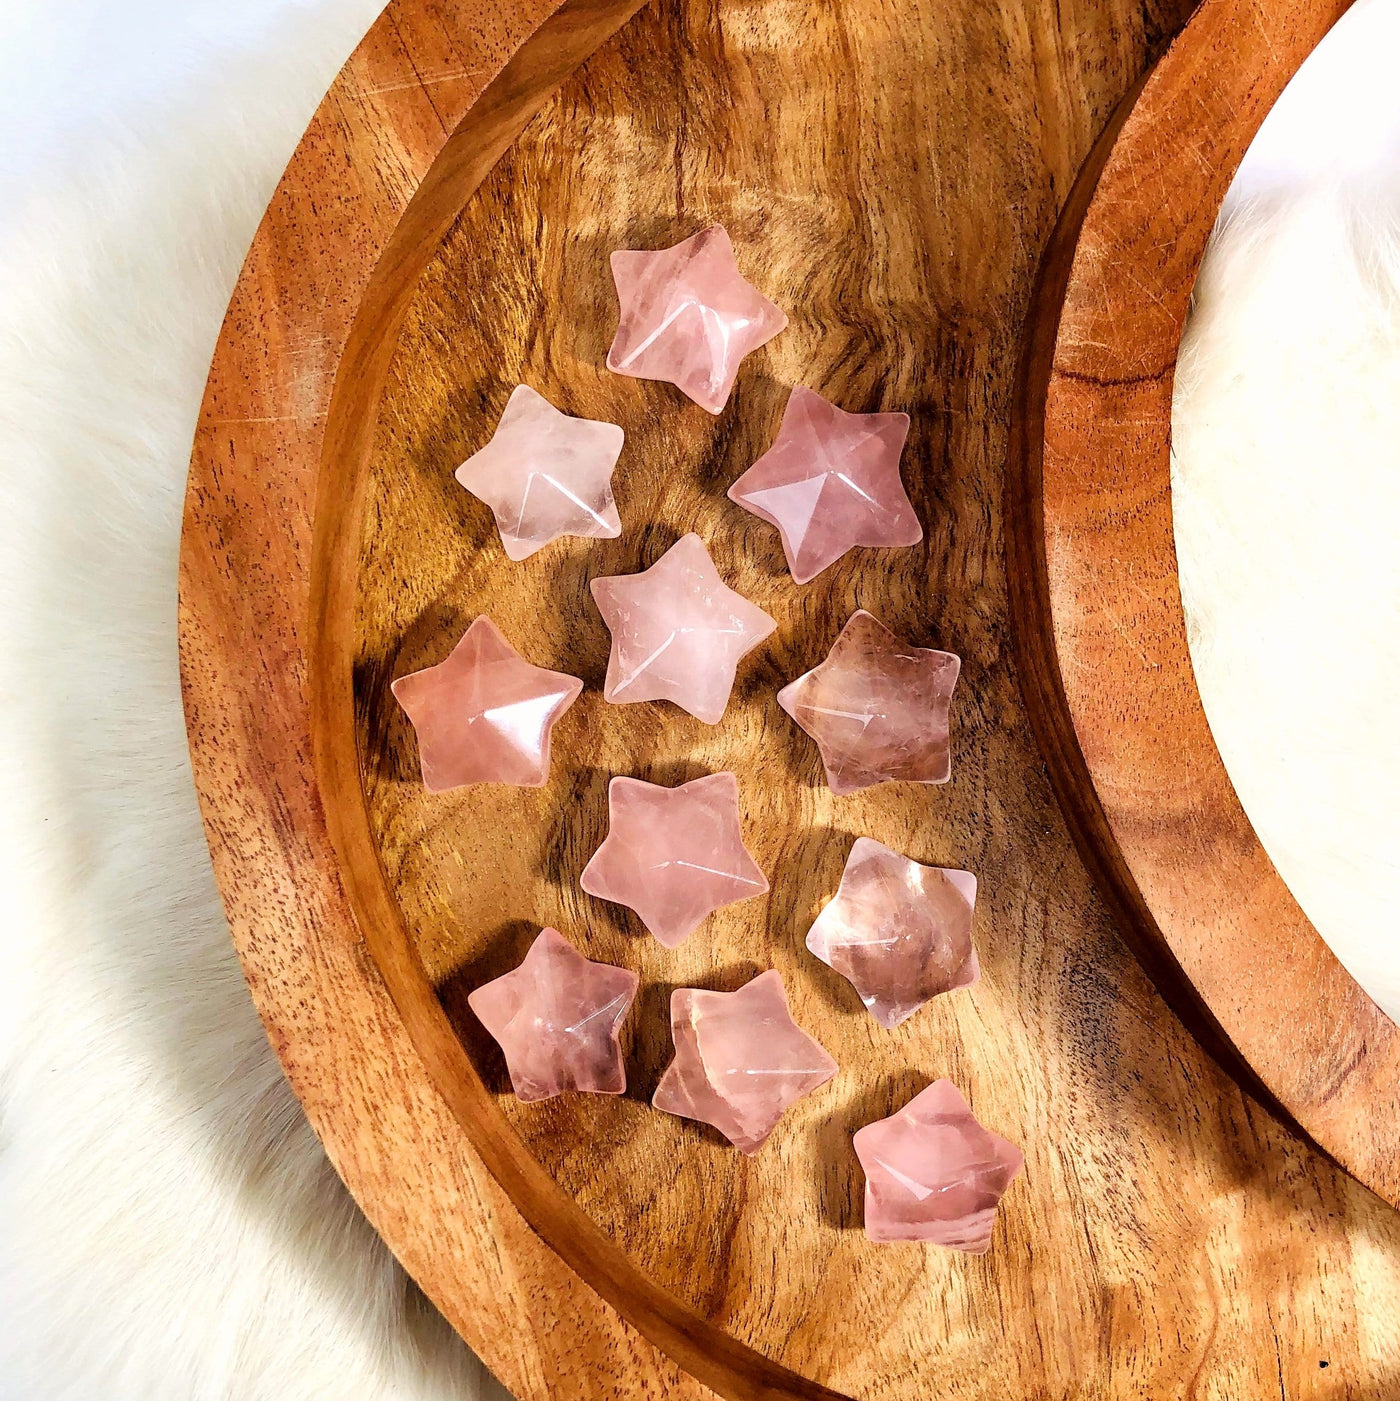 Eleven Rose Quartz Puffy Star Cabochon Gemstones displayed on a wooden moon shaped tray.